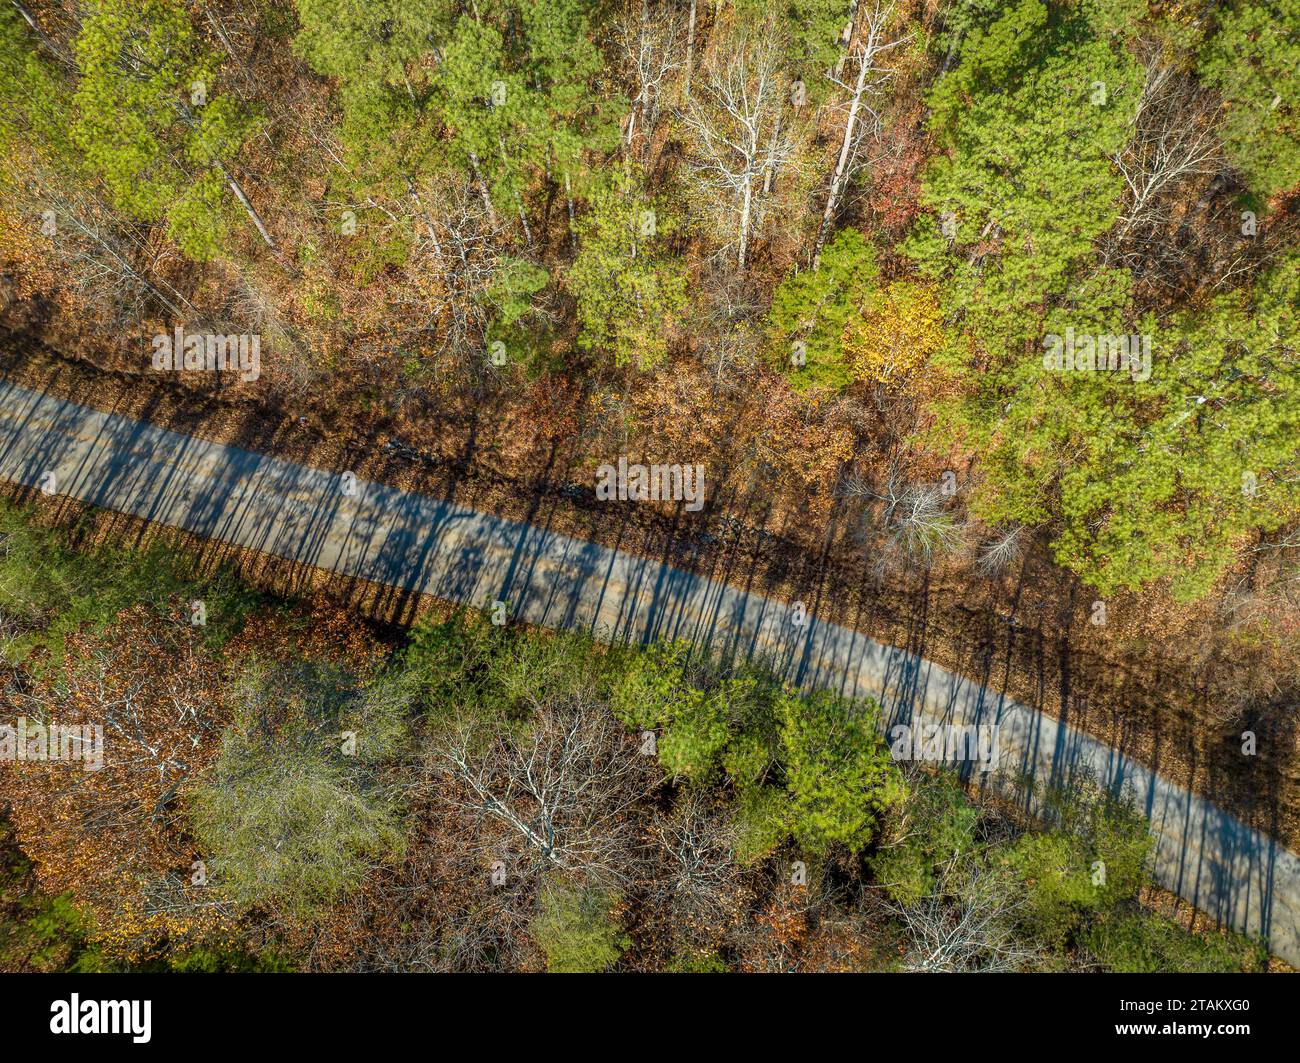 local highway through Alabama forest along the Tenessee River, Riverton Rose Trail, late November aerial view Stock Photo